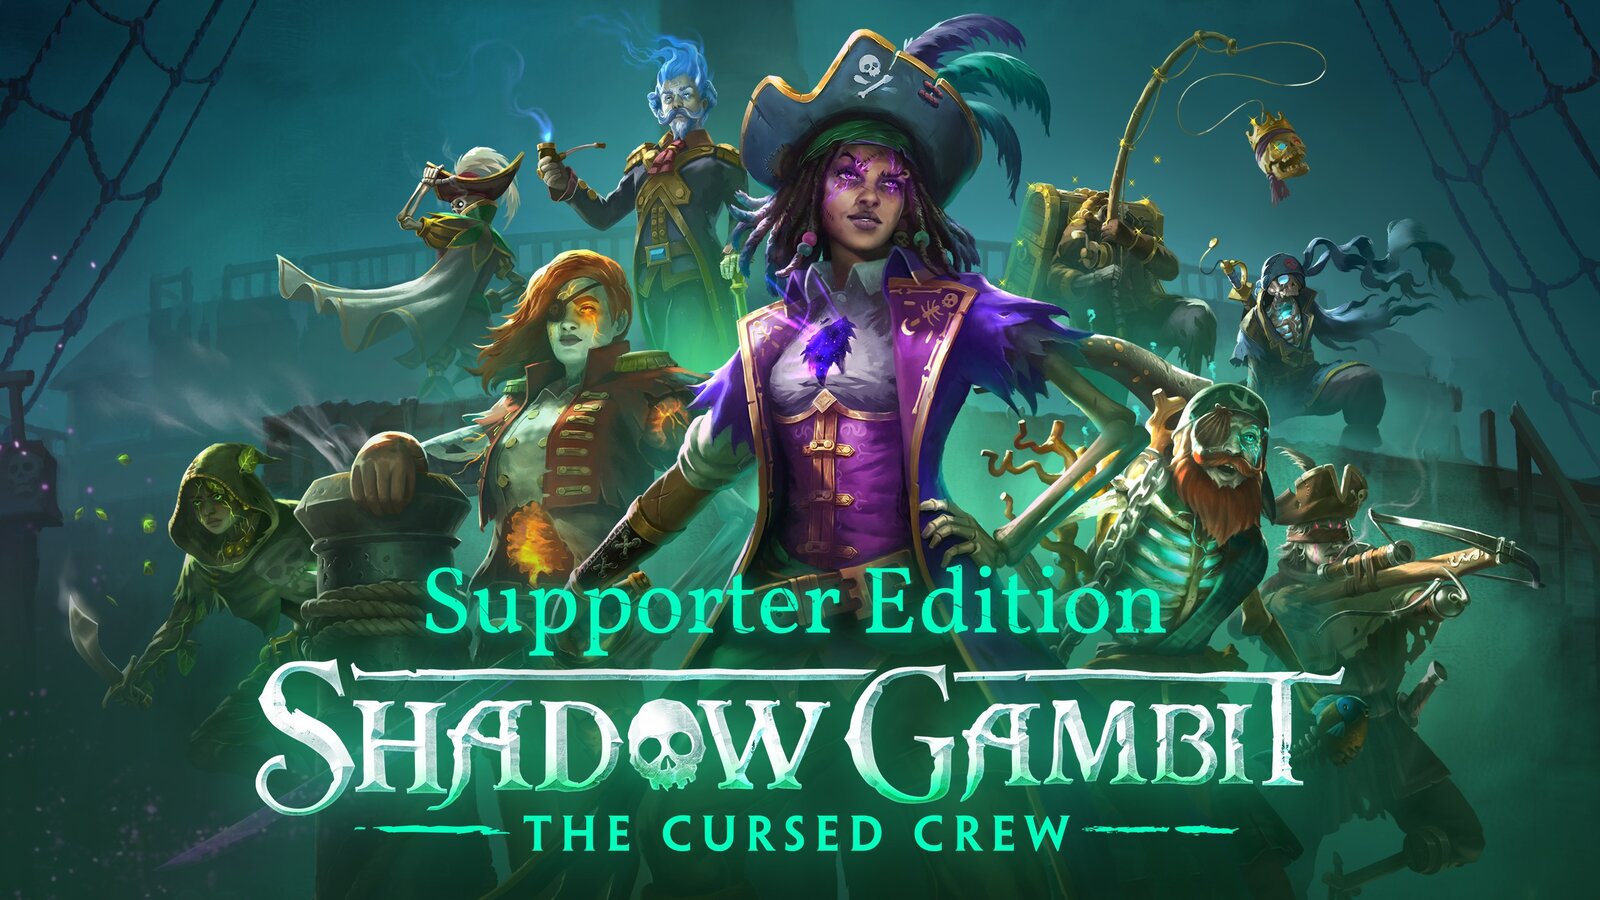 Shadow Gambit: The Cursed Crew - Supporter Edition